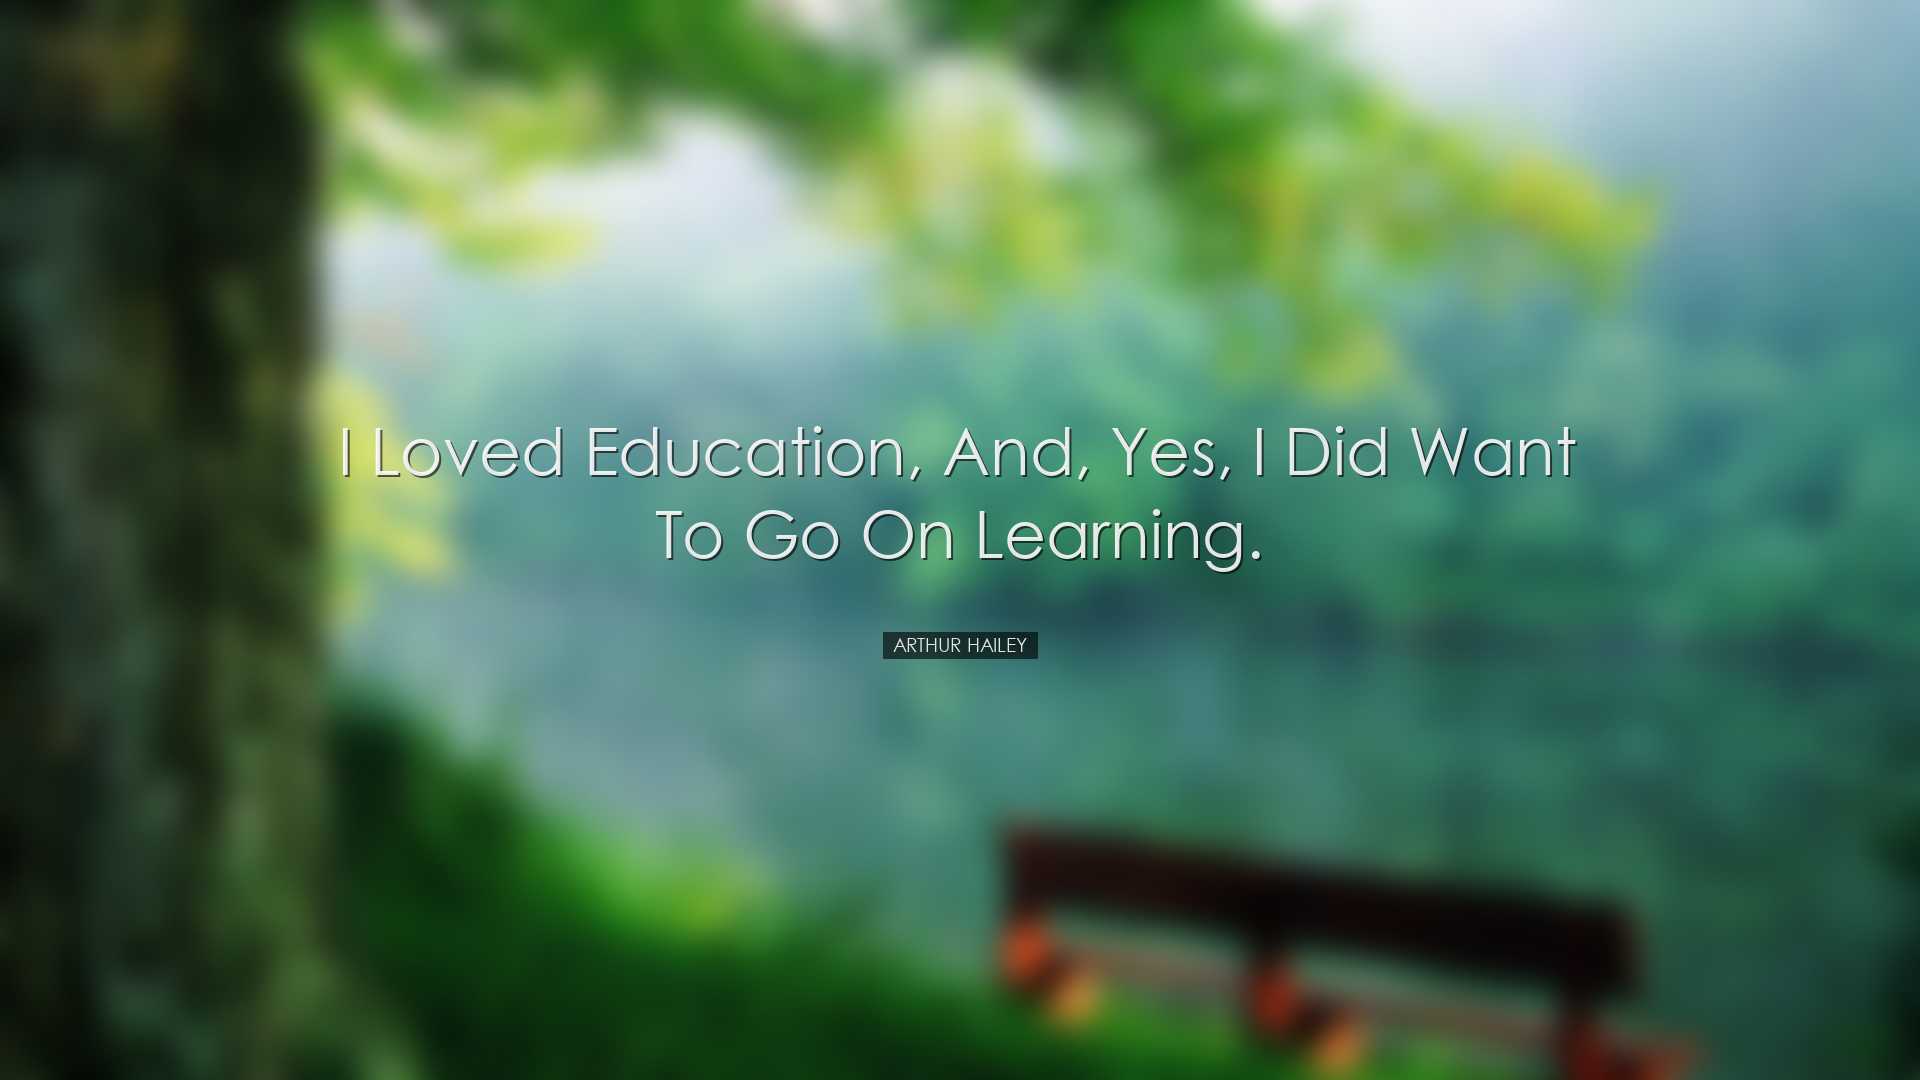 I loved education, and, yes, I did want to go on learning. - Arthu